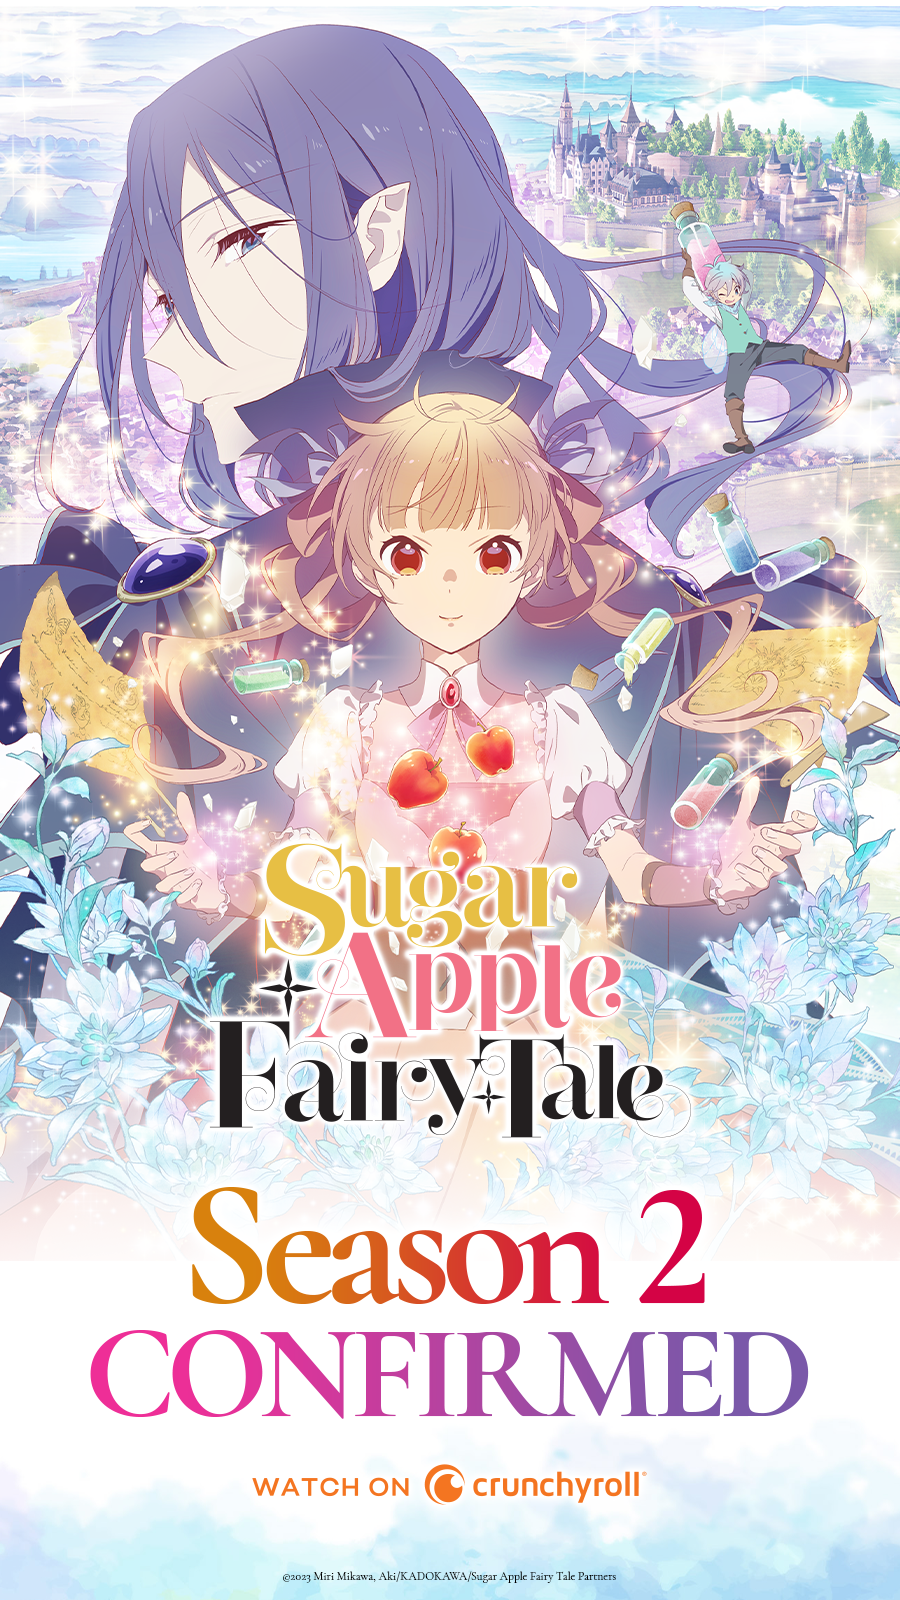 A key visual for the newly announced second season of the Sugar Apple Fairy Tale TV anime featuring the main characters of the series.